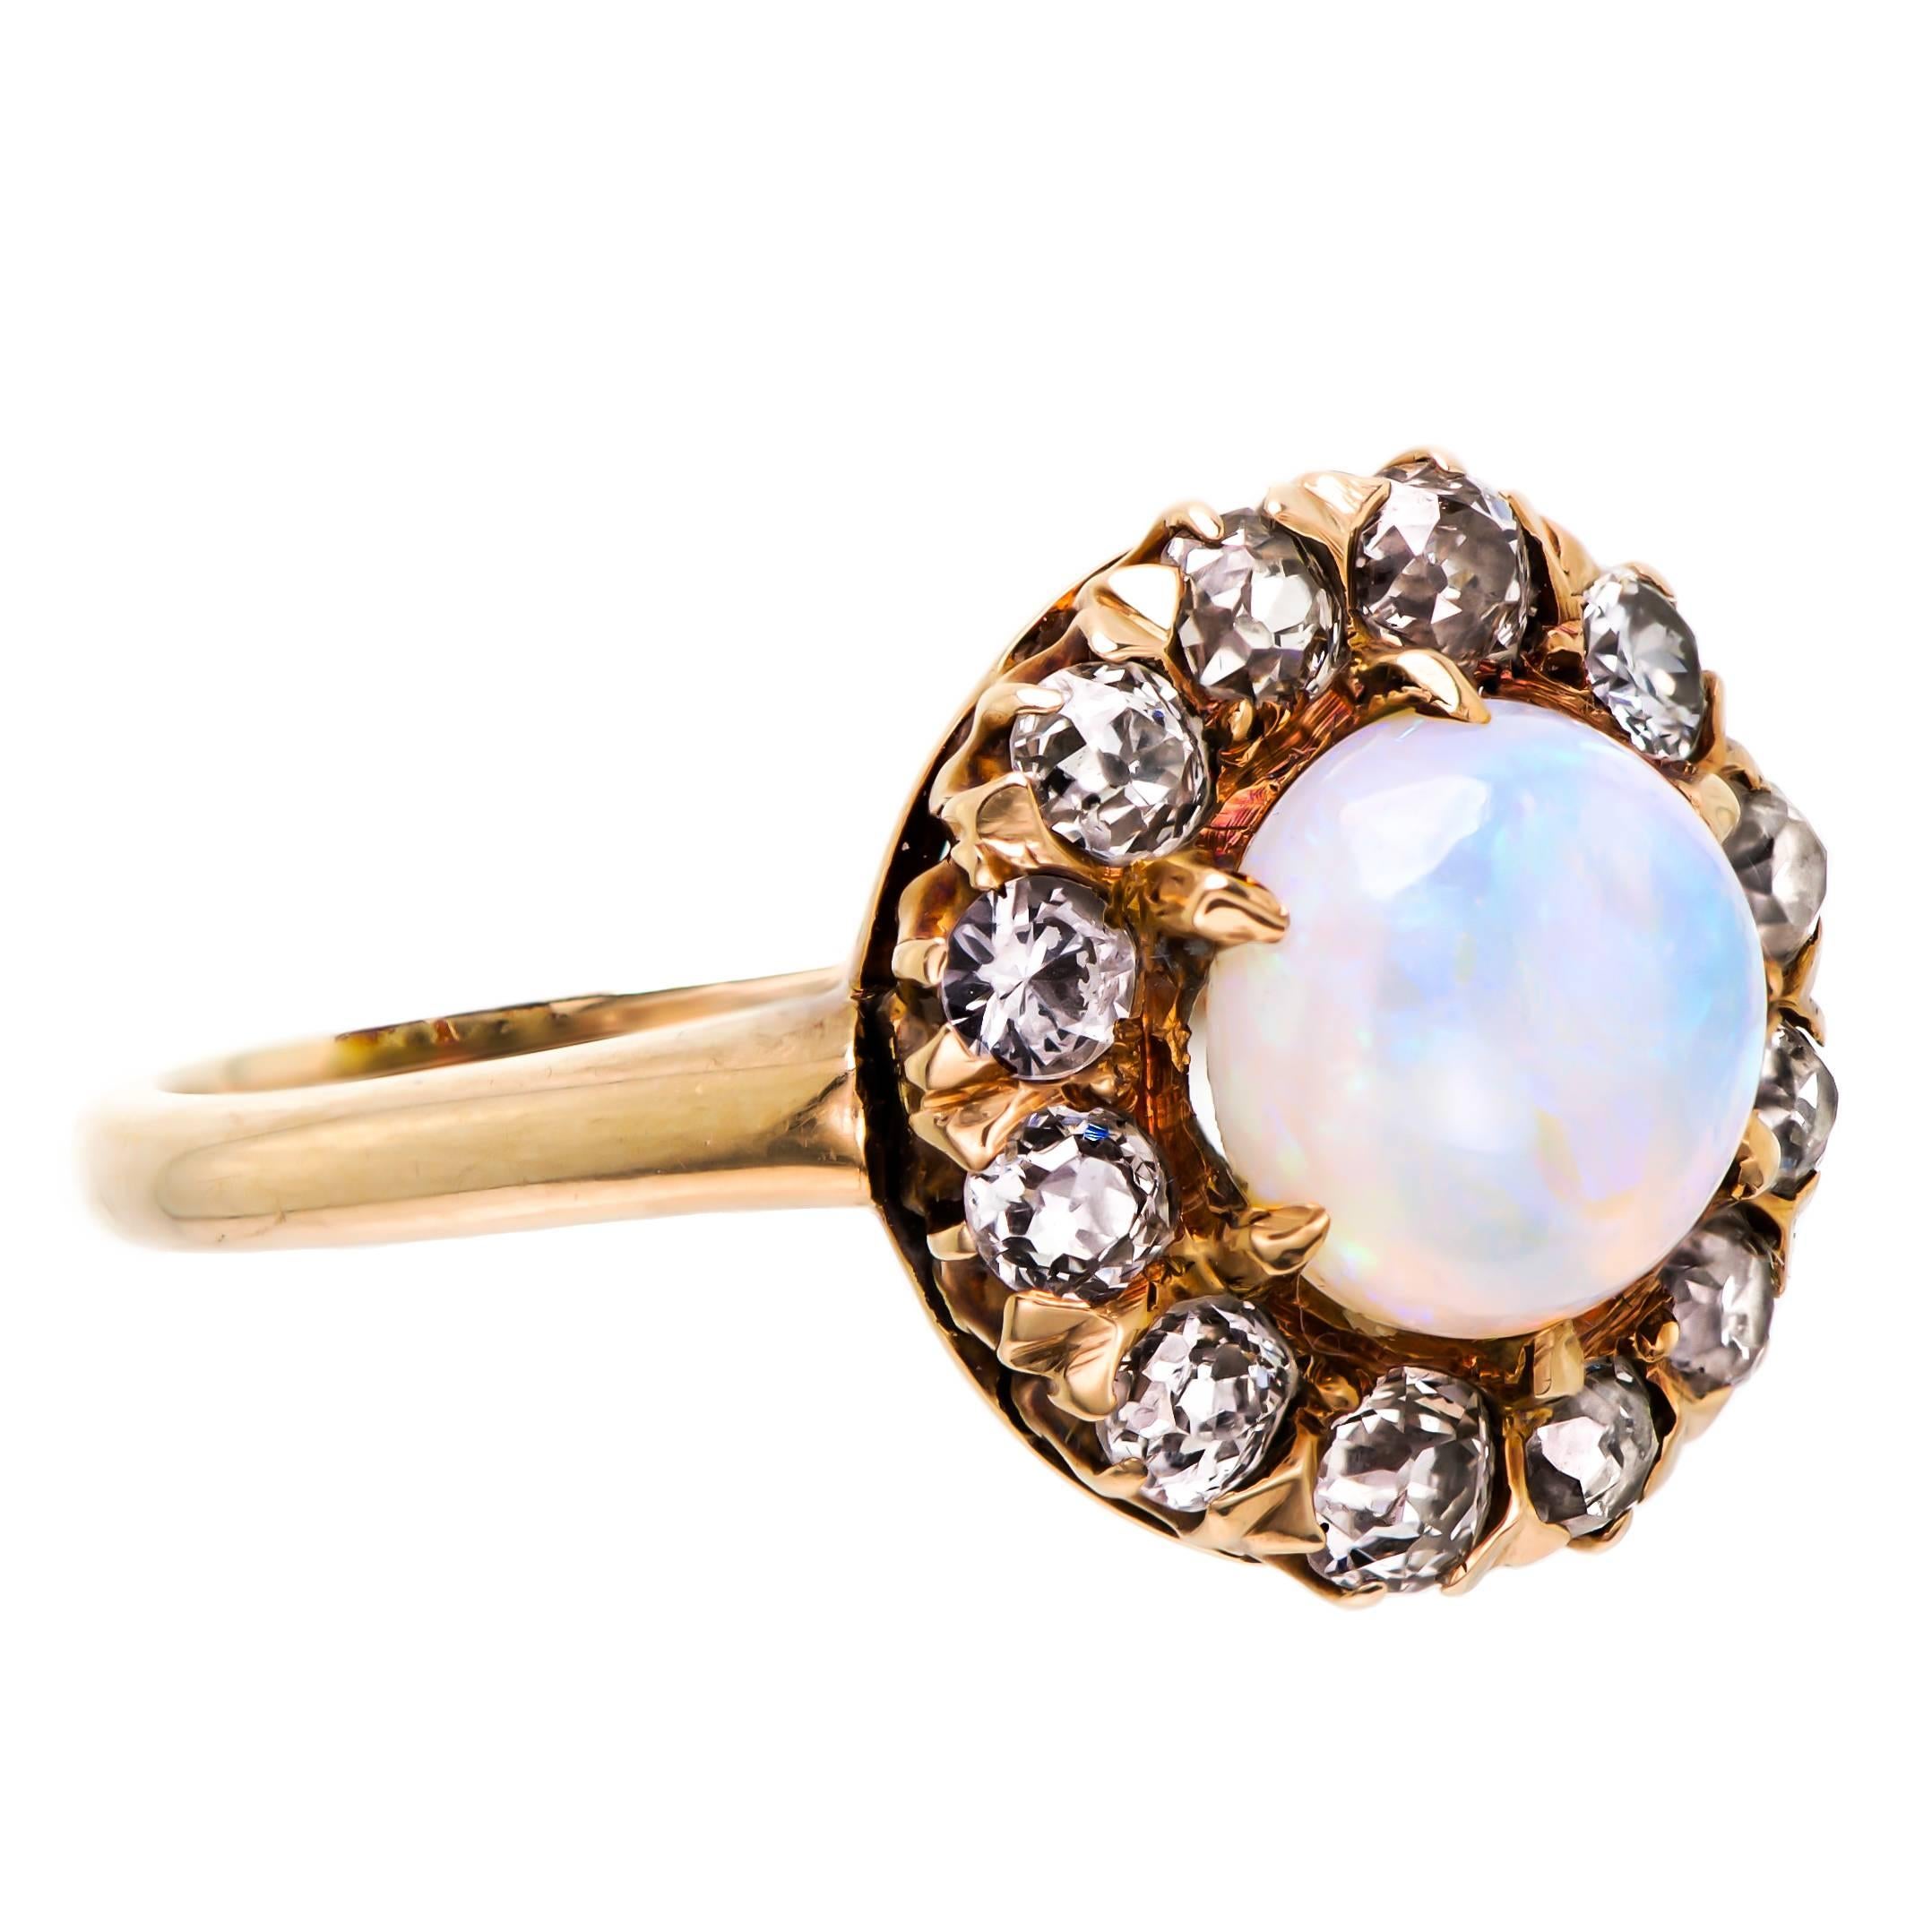 Circa 1900 Victorian opal diamond and yellow gold ring set with one (1) approximately 7mm round cabochon opal prong set second accented by twelve (12) Old European Cut diamonds approximately 0.05cts each for an approximate total of 0.60cts. 